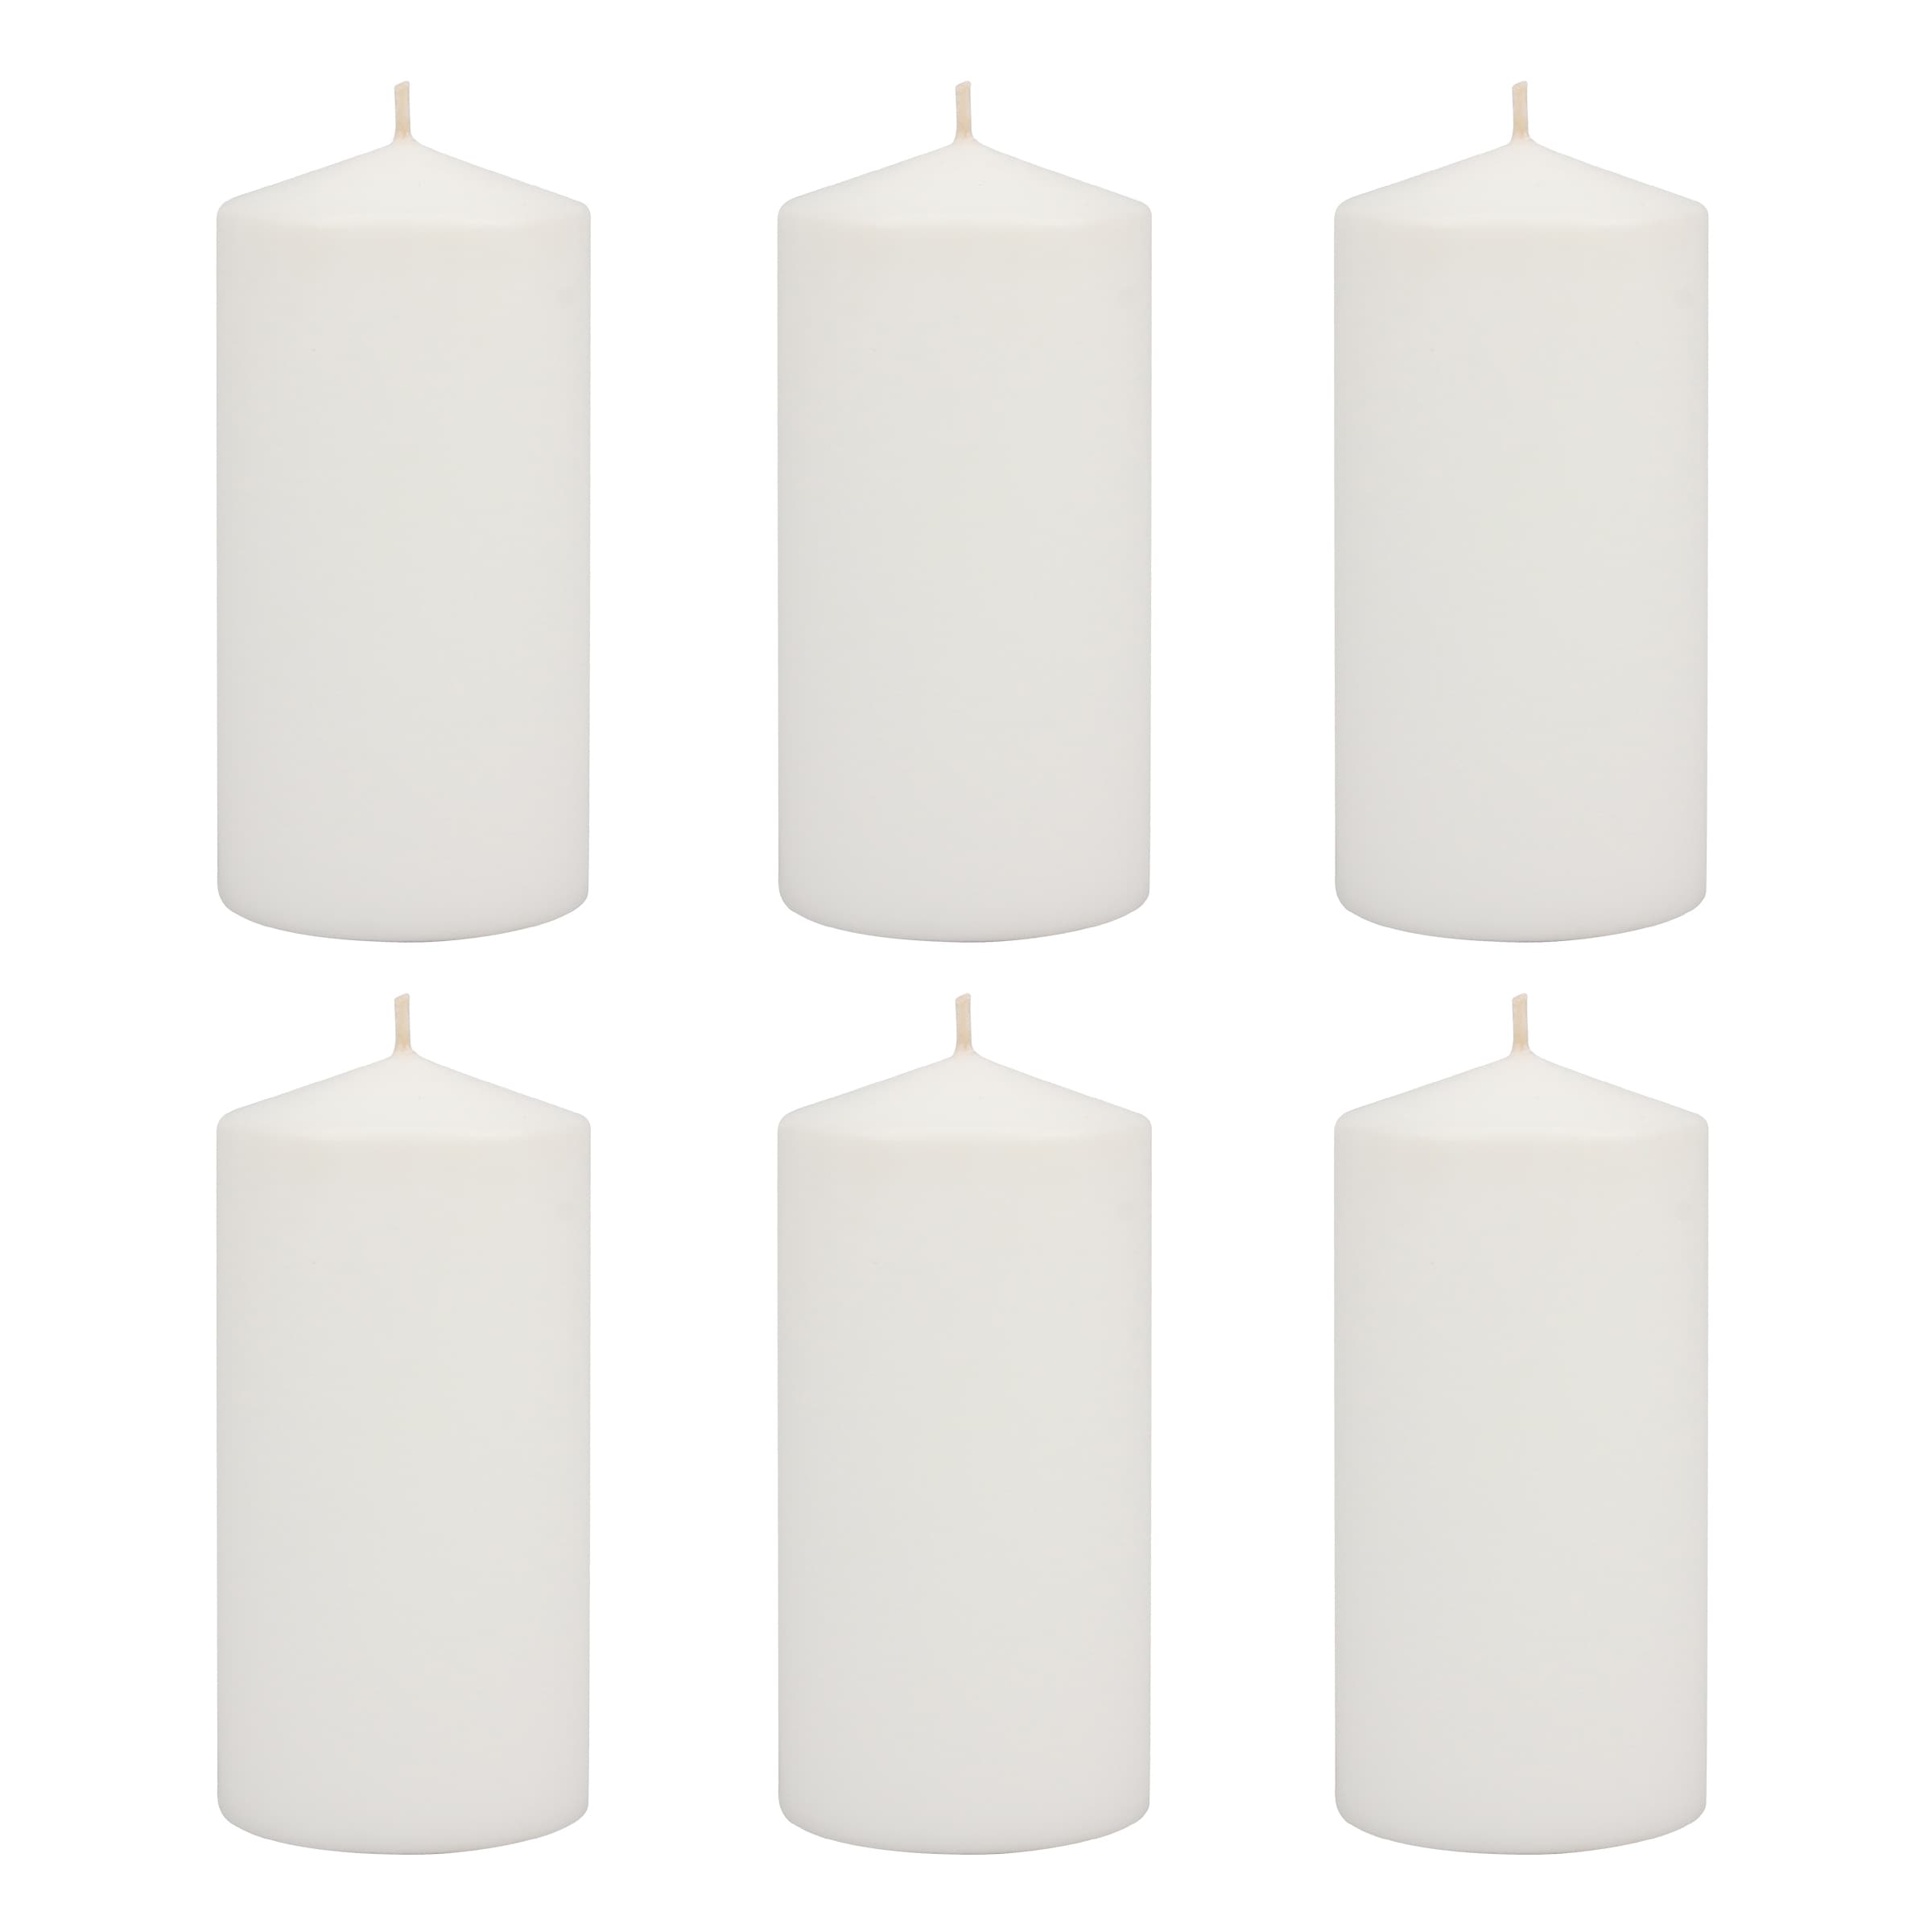 Luminessence Unscented White Emergency Candles, 6-ct. Packs